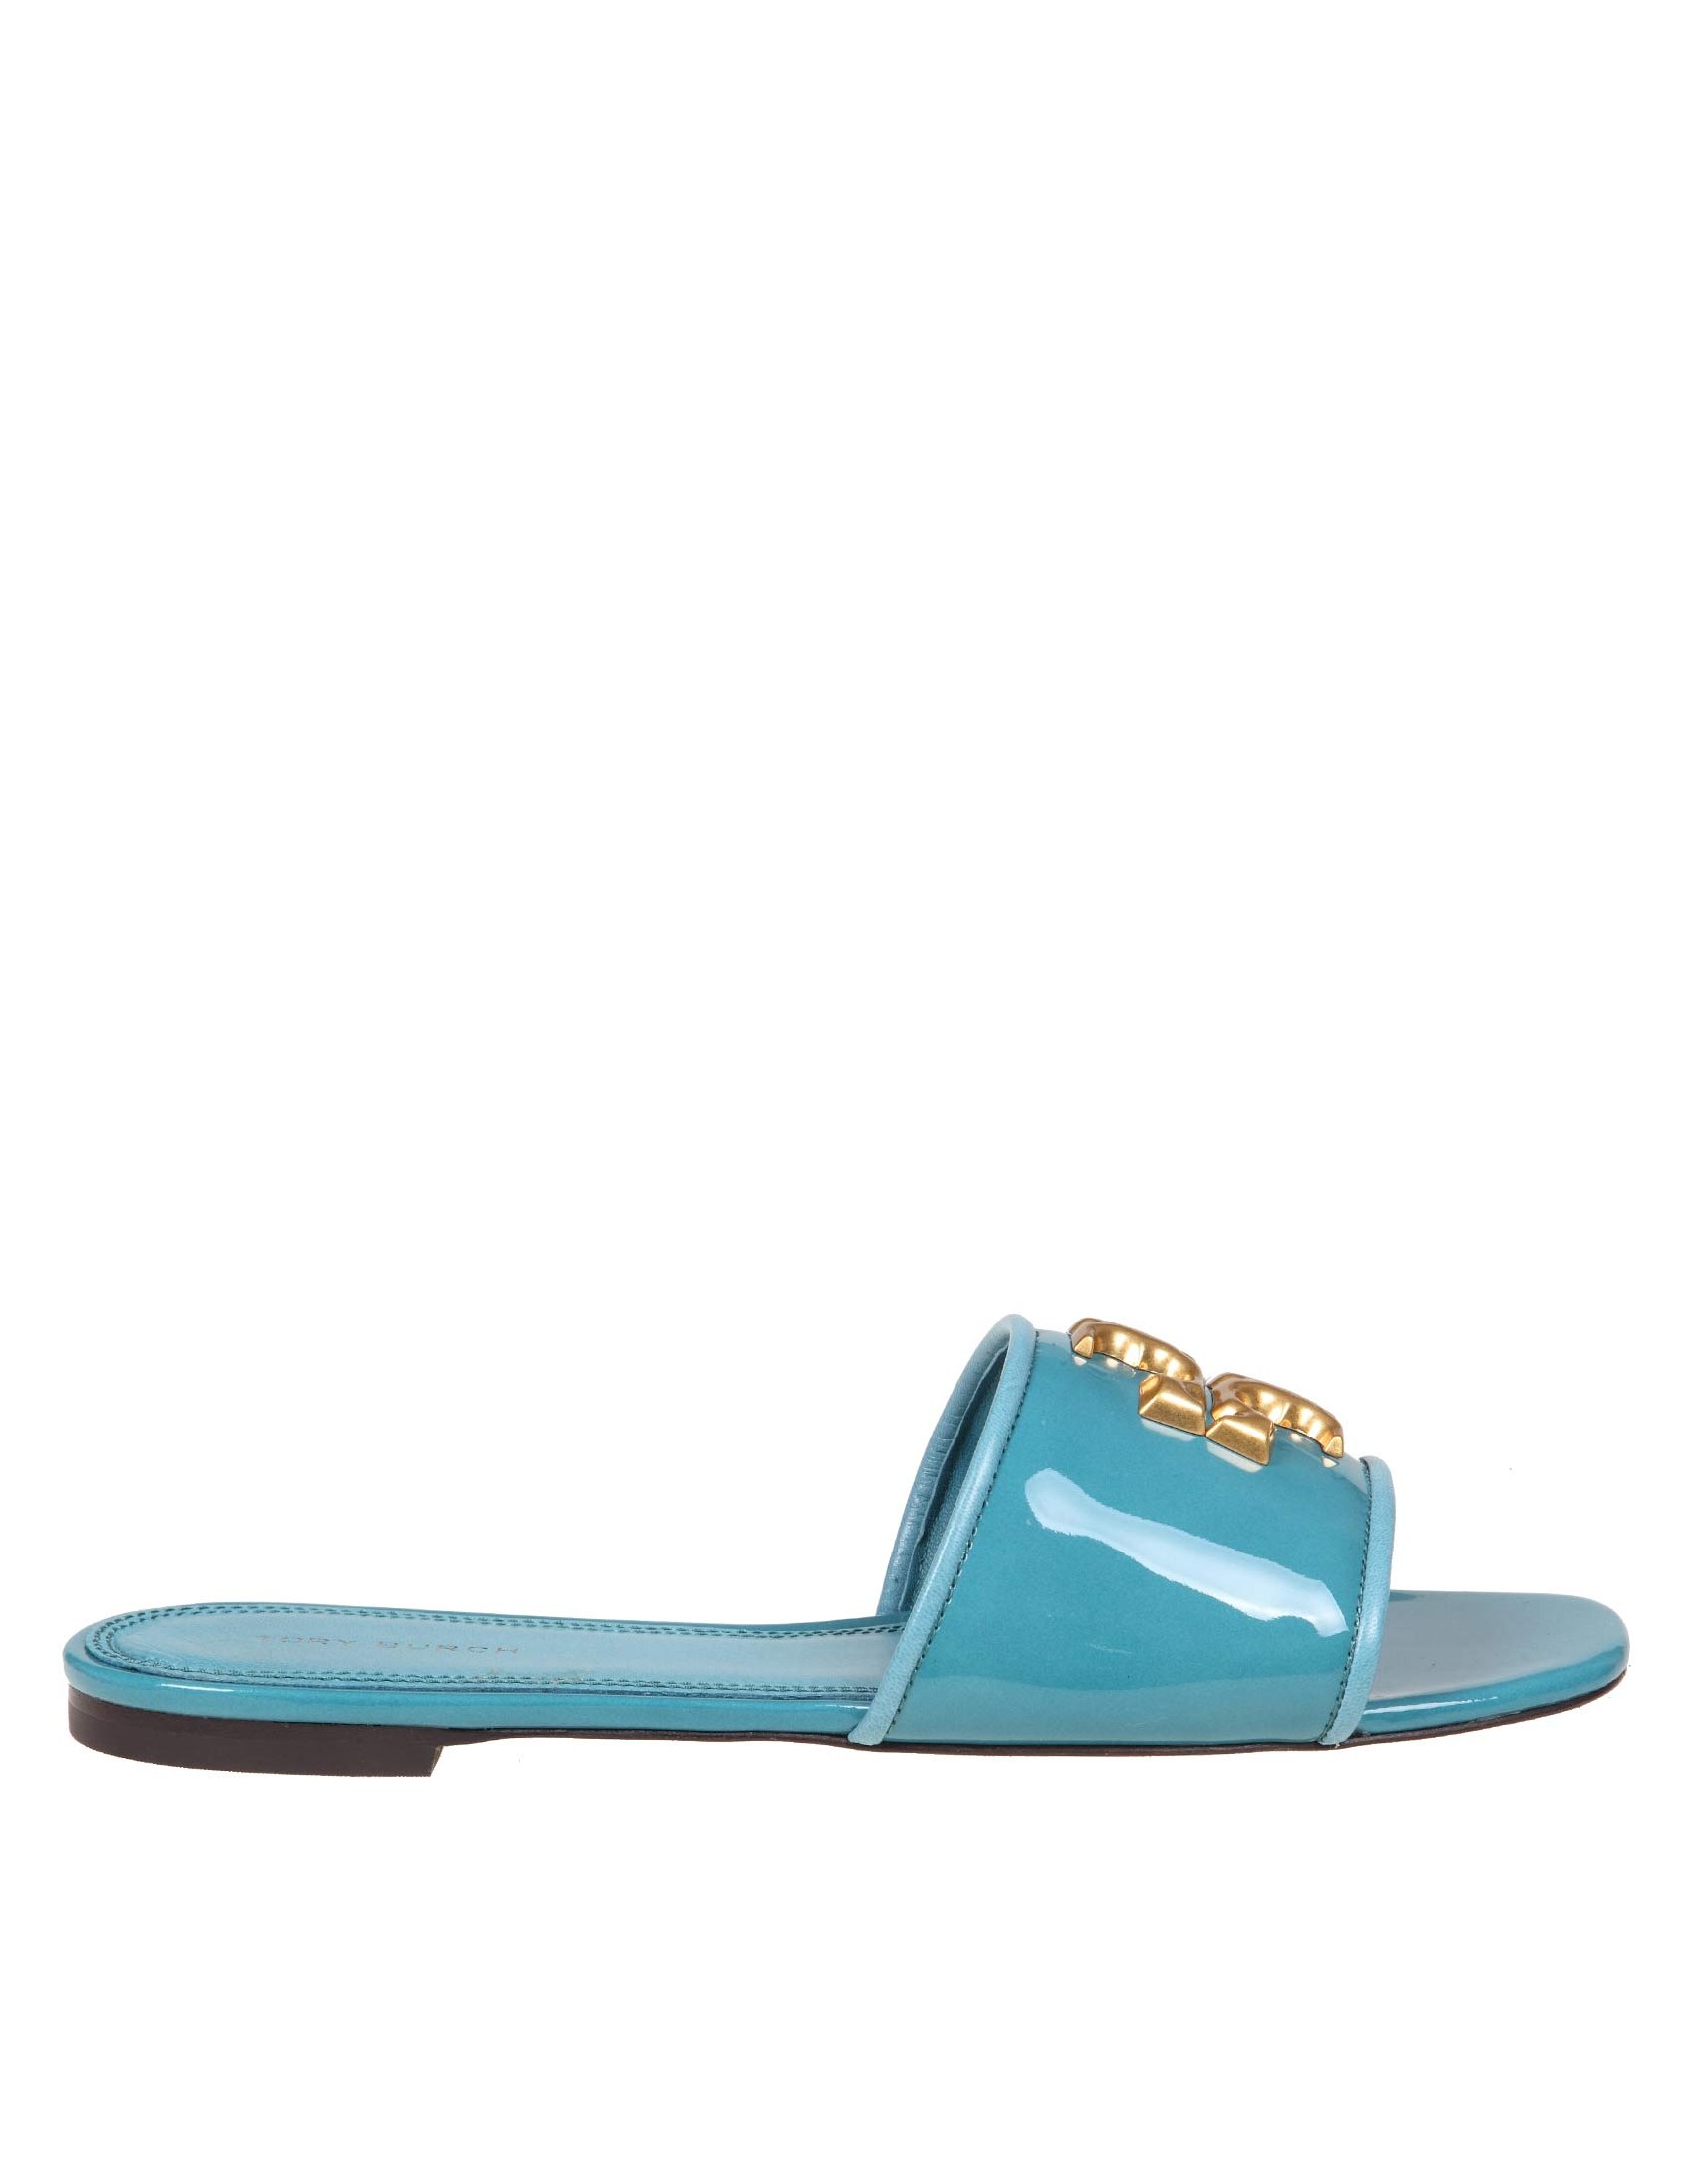 TORY BURCH SLIDE ELEANOR IN PATENT LEATHER